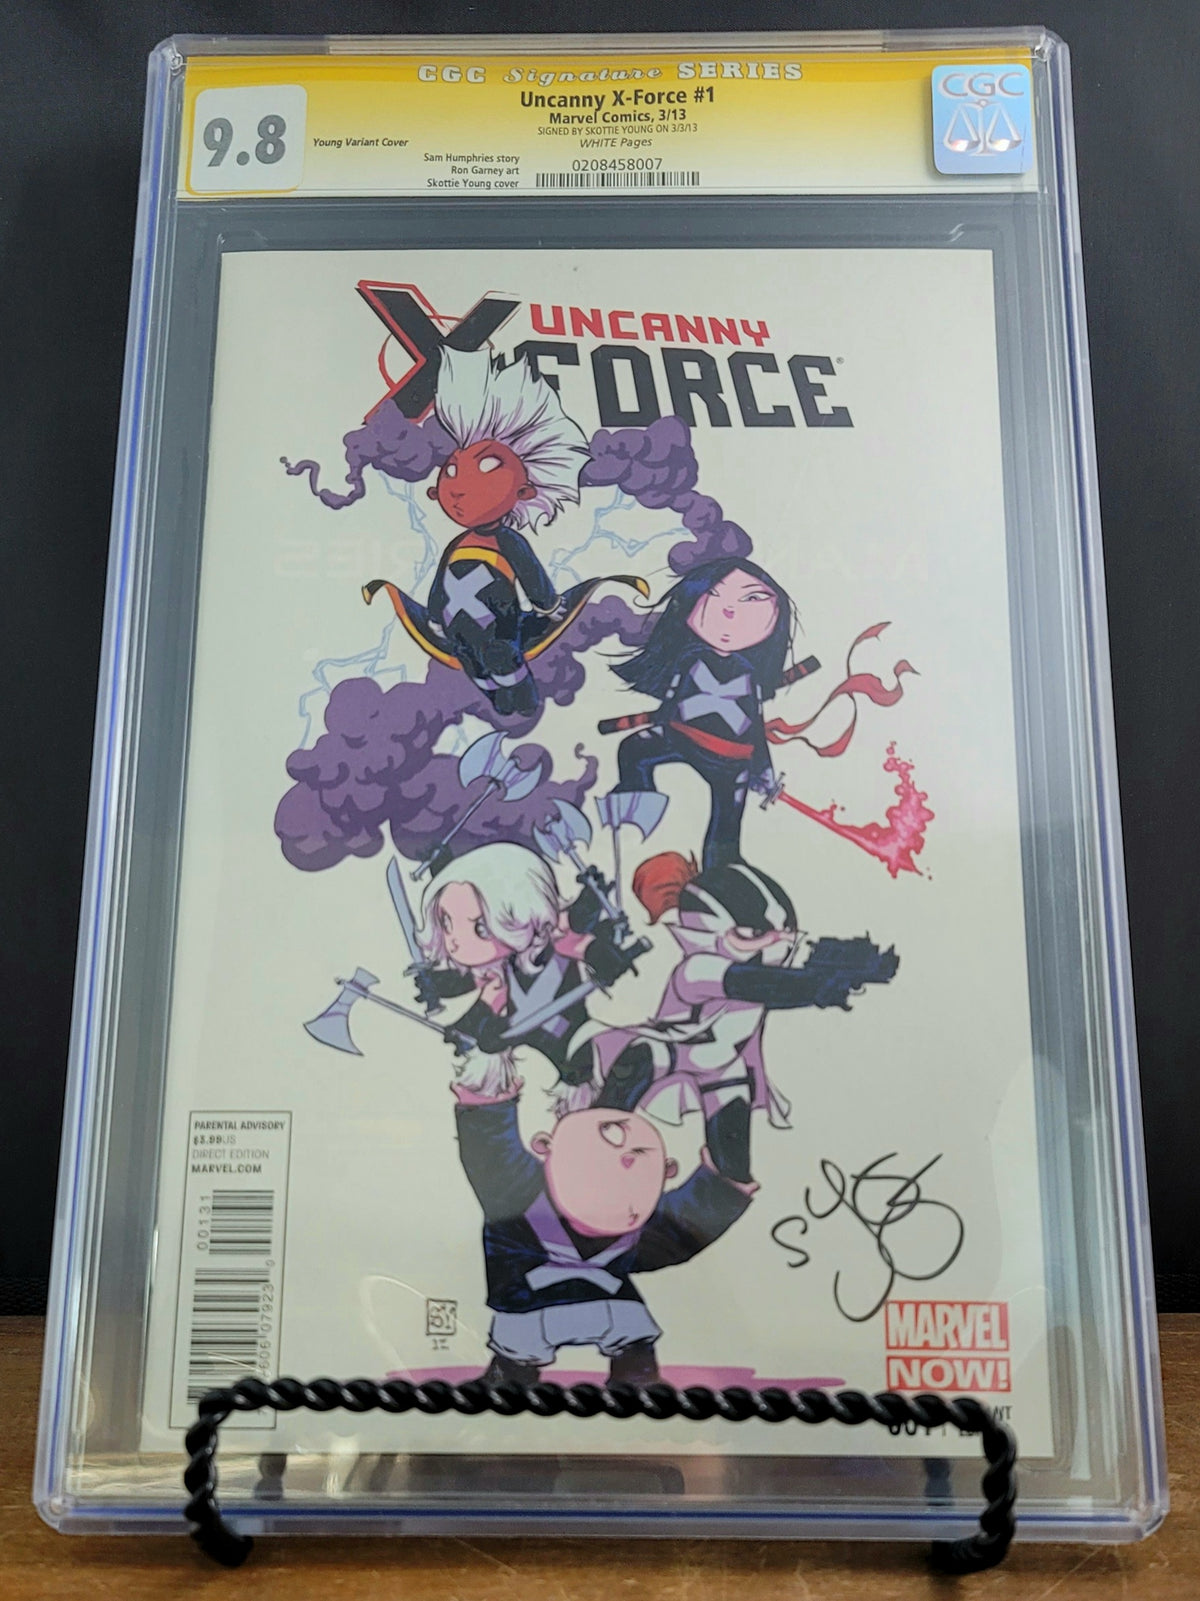 Photo of Uncanny X-Force, Vol. 2 (2013) Issue 1C - CGC 9.8 Near Mint/Mint Signature Series: Skottie Young Comic sold by Stronghold Collectibles